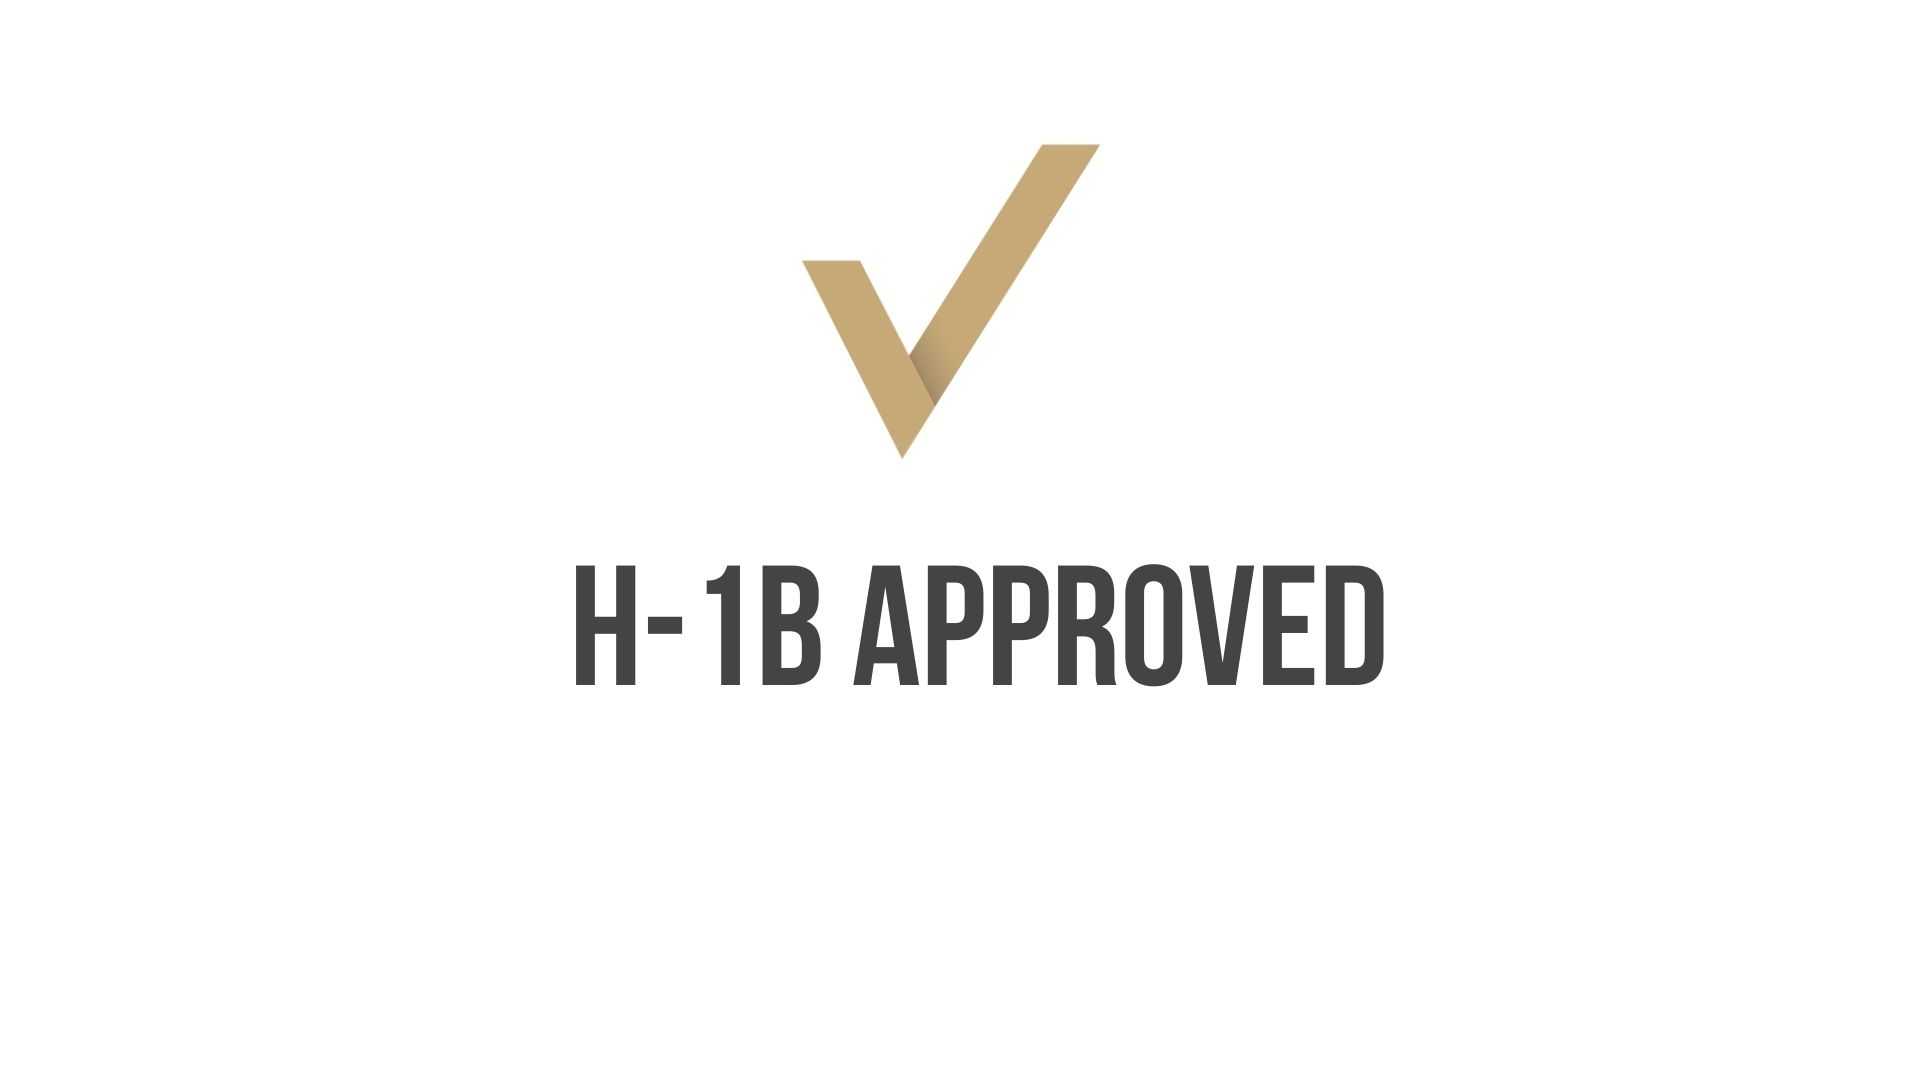 H-1B Approval in 11 Days